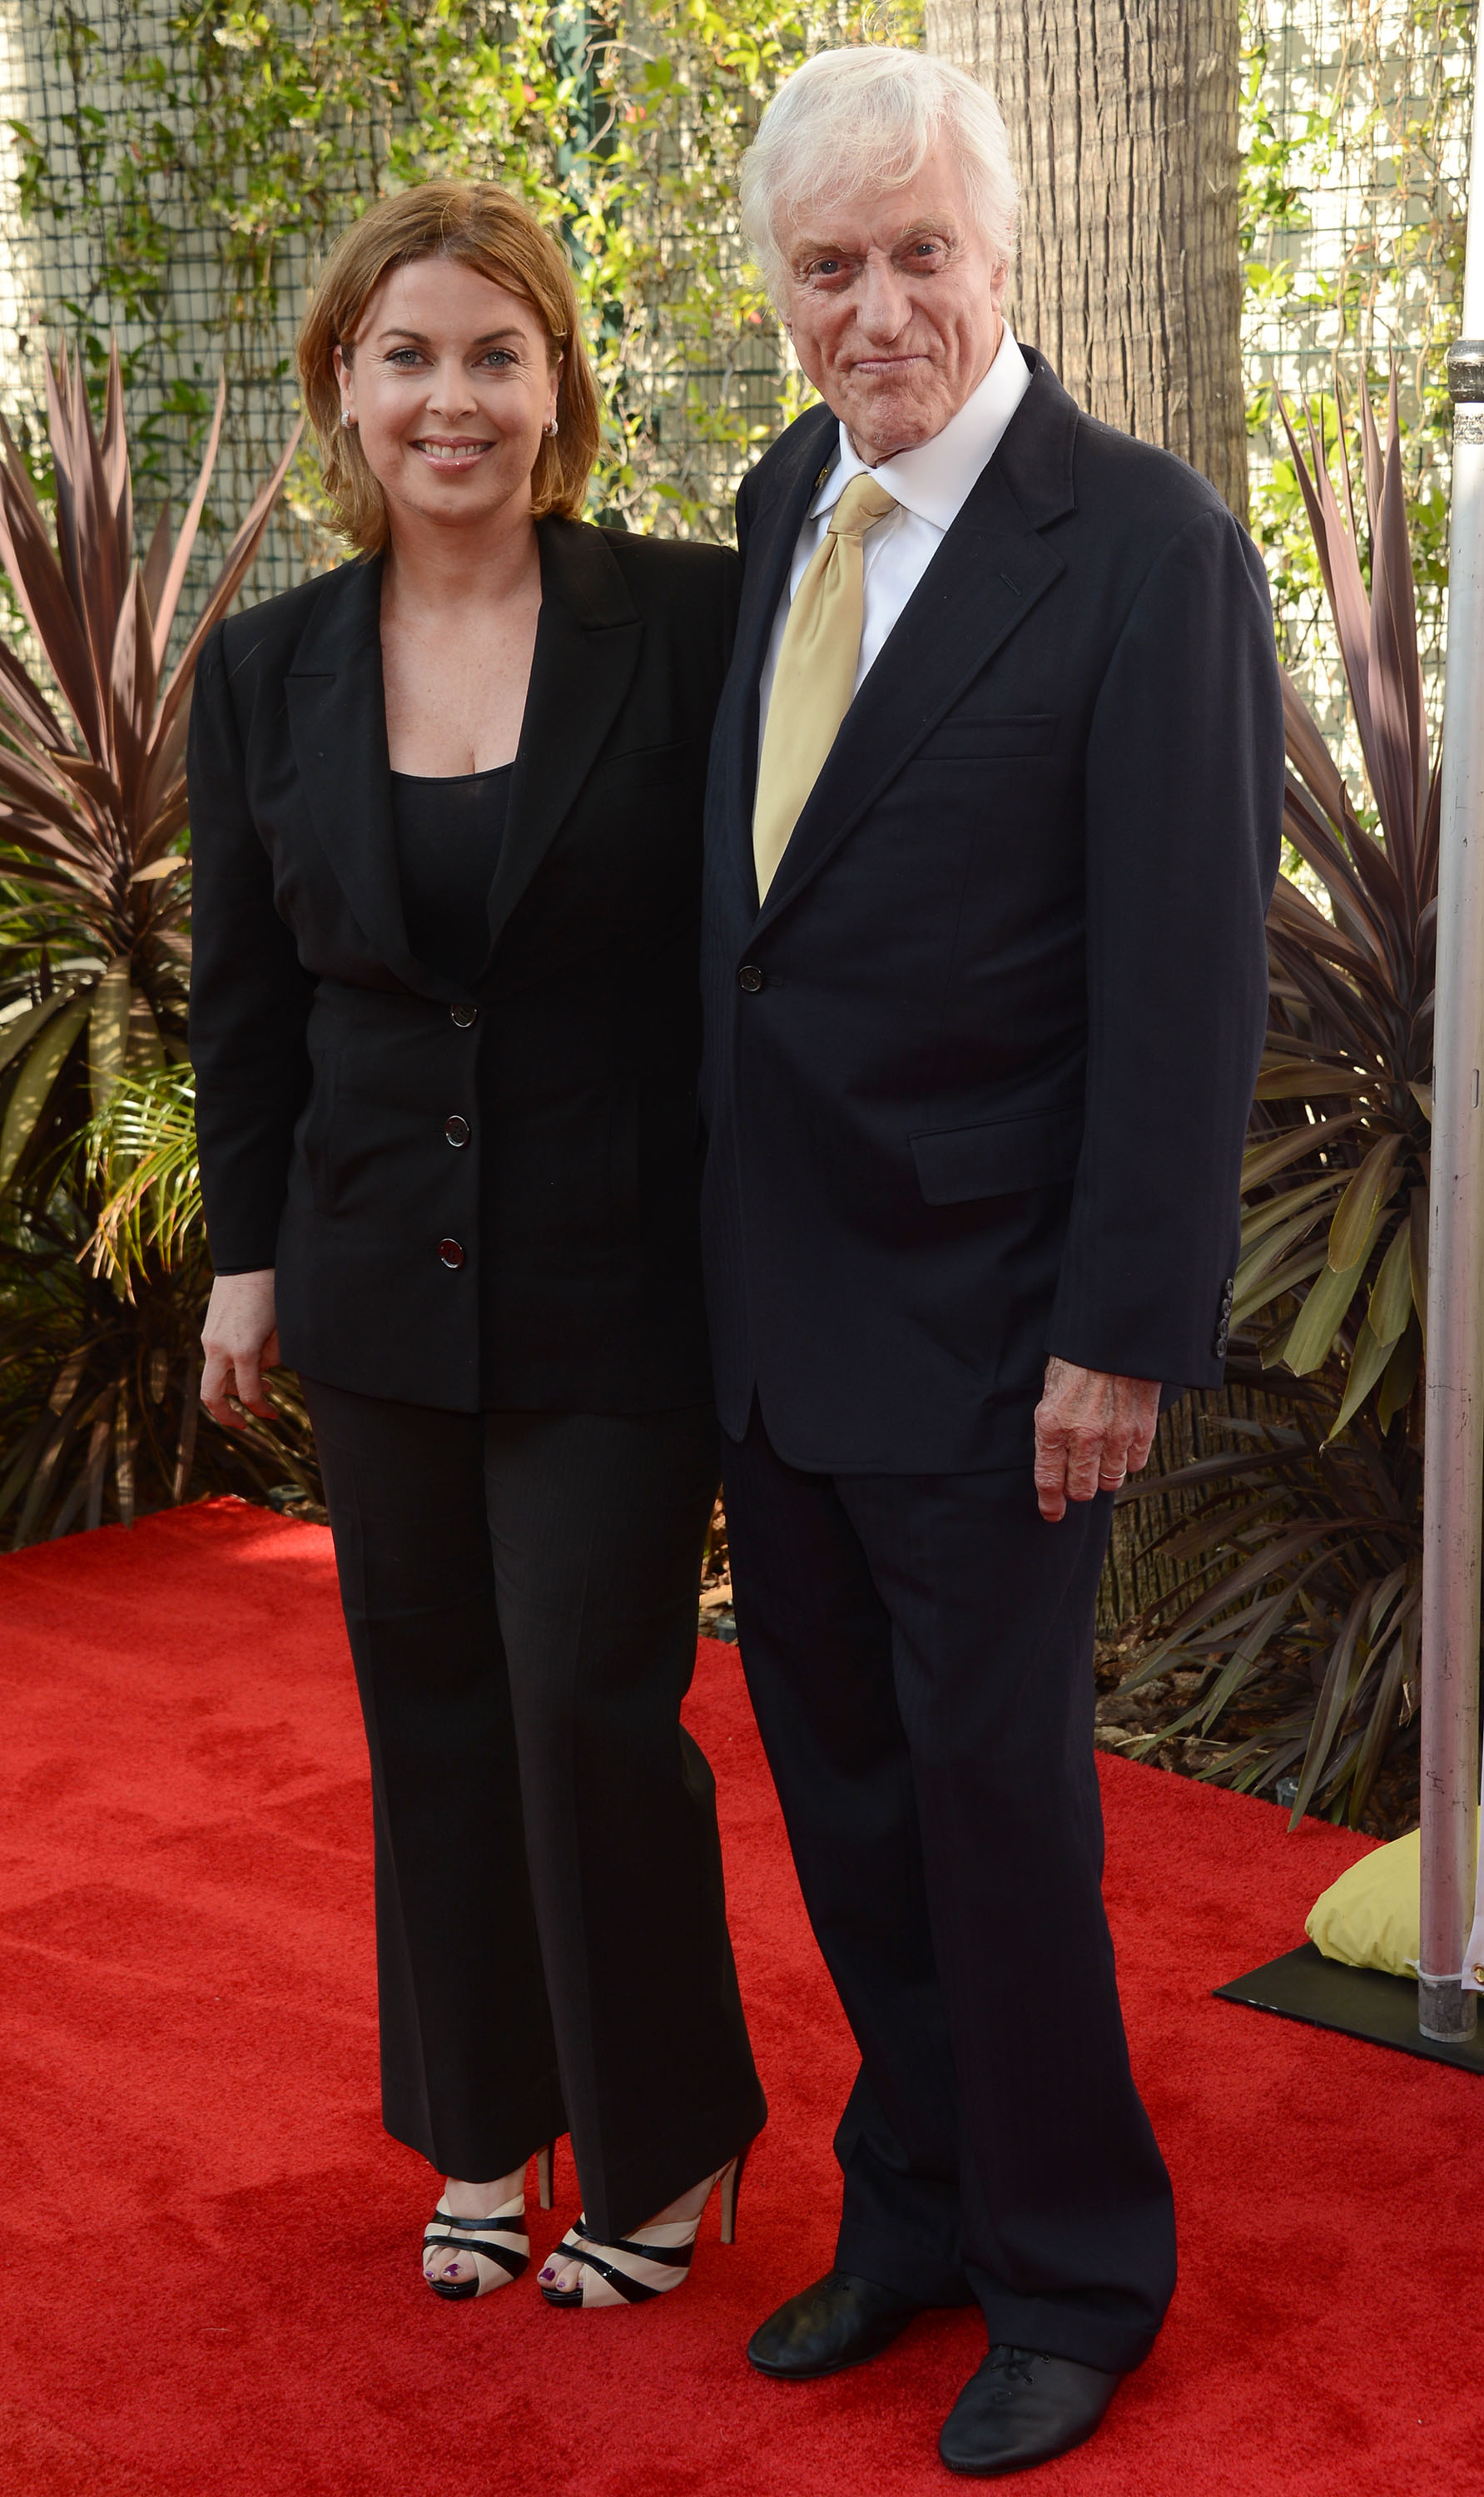 Arlene Silver and her husband Dick Van Dyke attend the Backstage At The Geffen Fundraiser at the Geffen Playhouse on June 4, 2012 in Los Angeles, California | Source: Getty Images